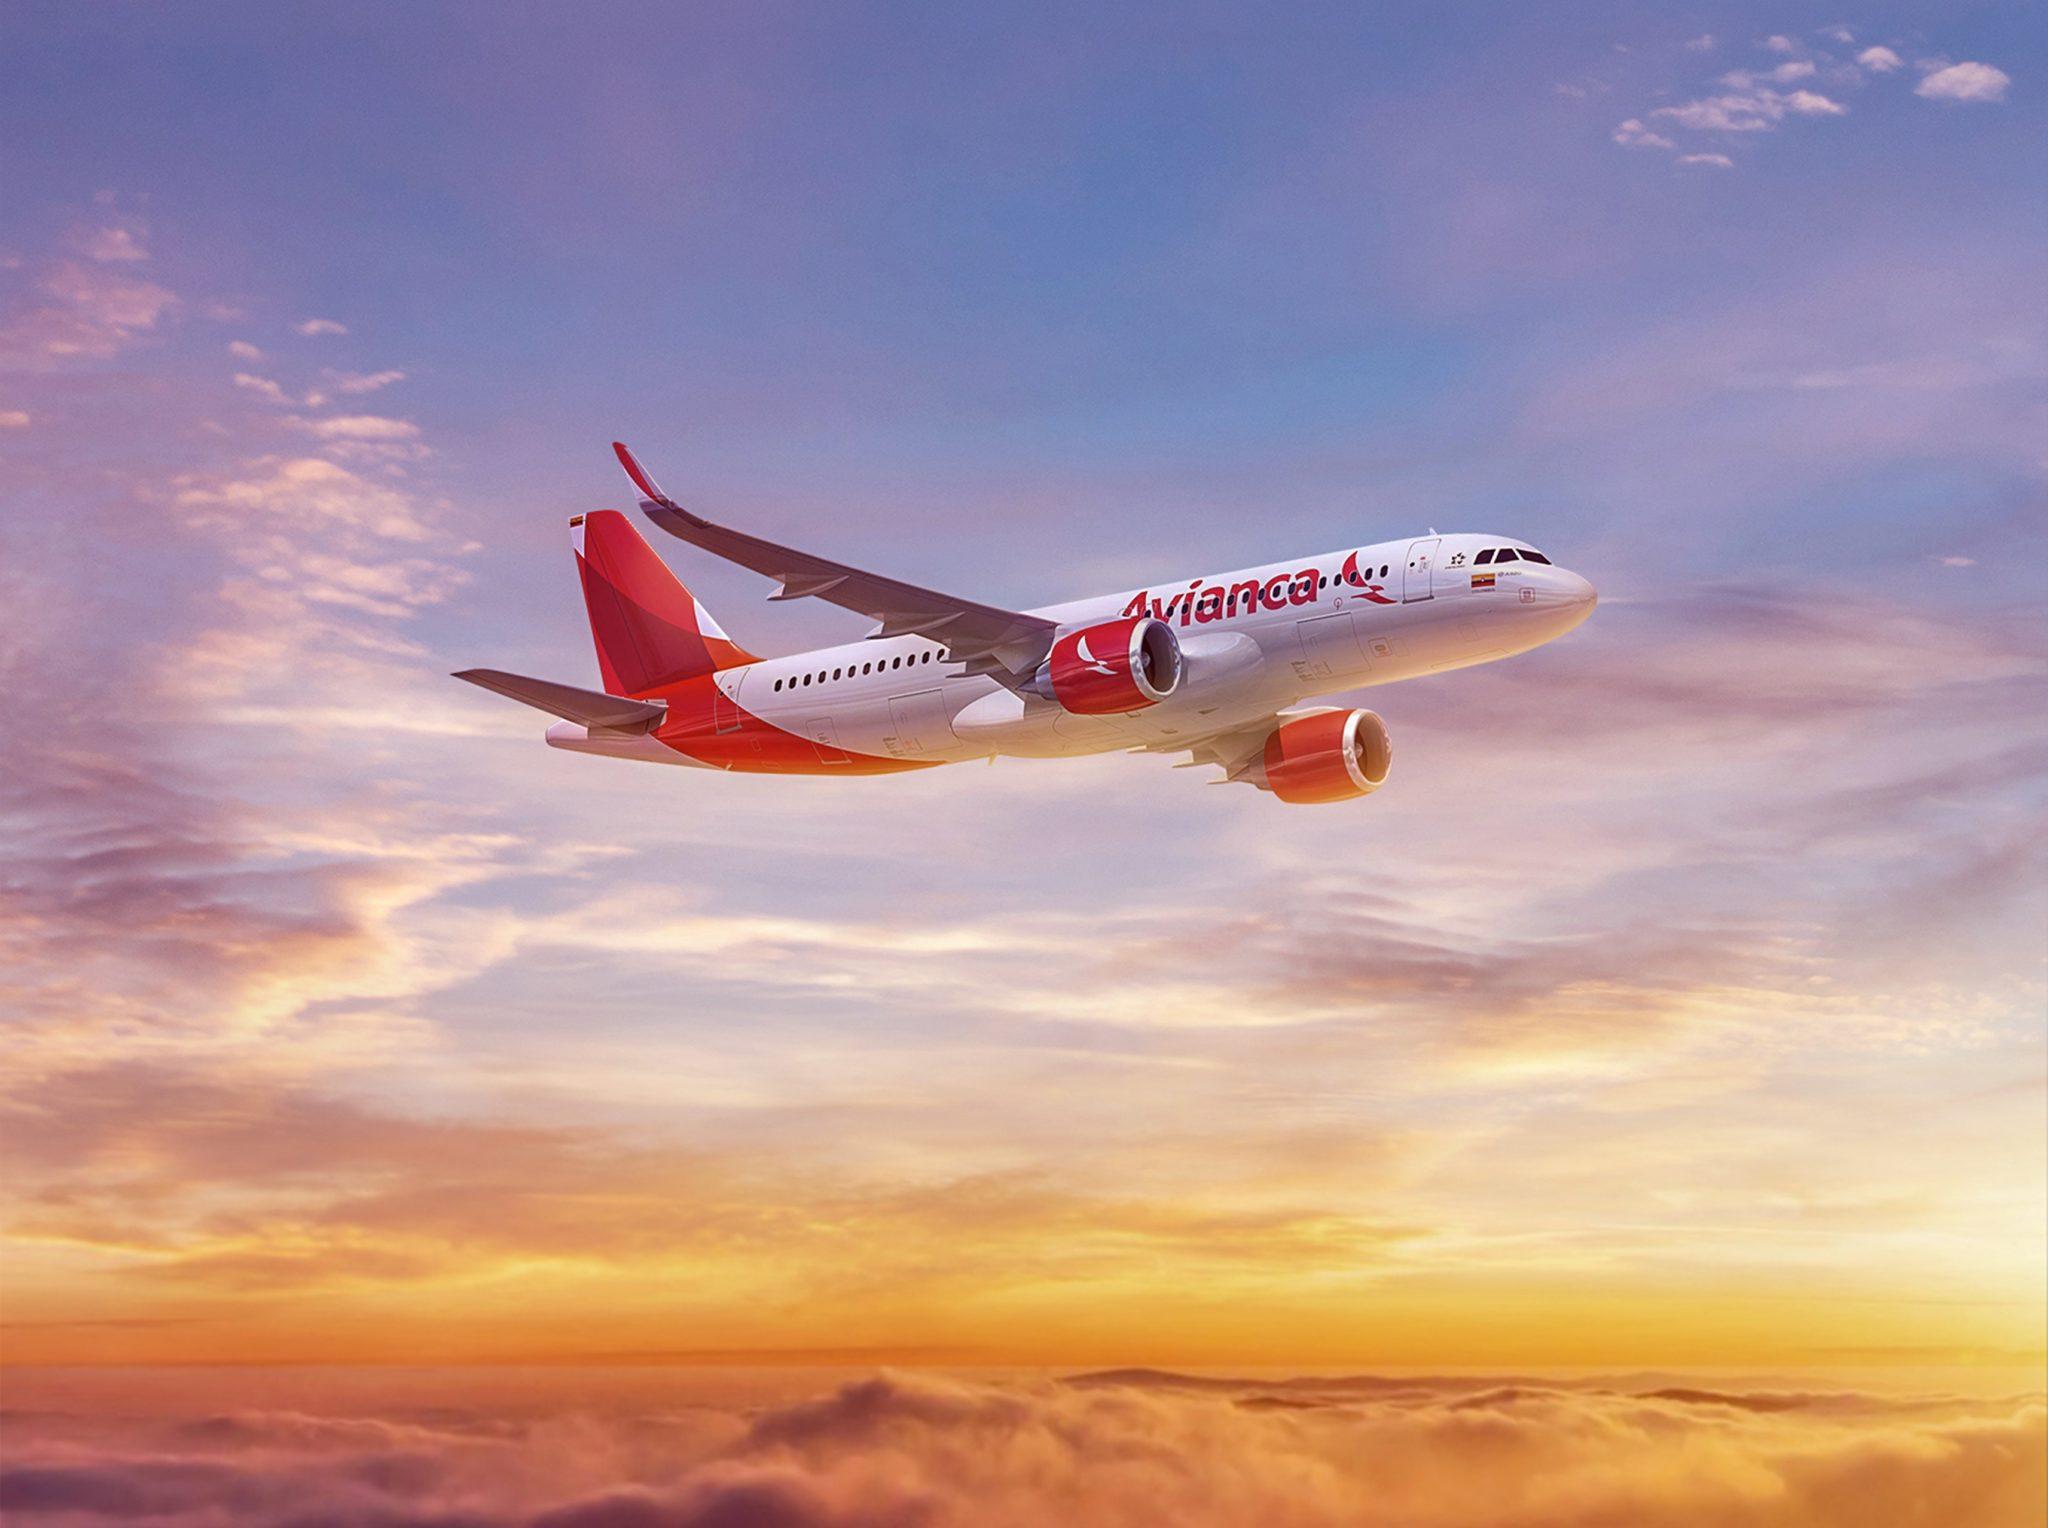 Avianca And Viva Shareholders Join Economic Ownership In A New